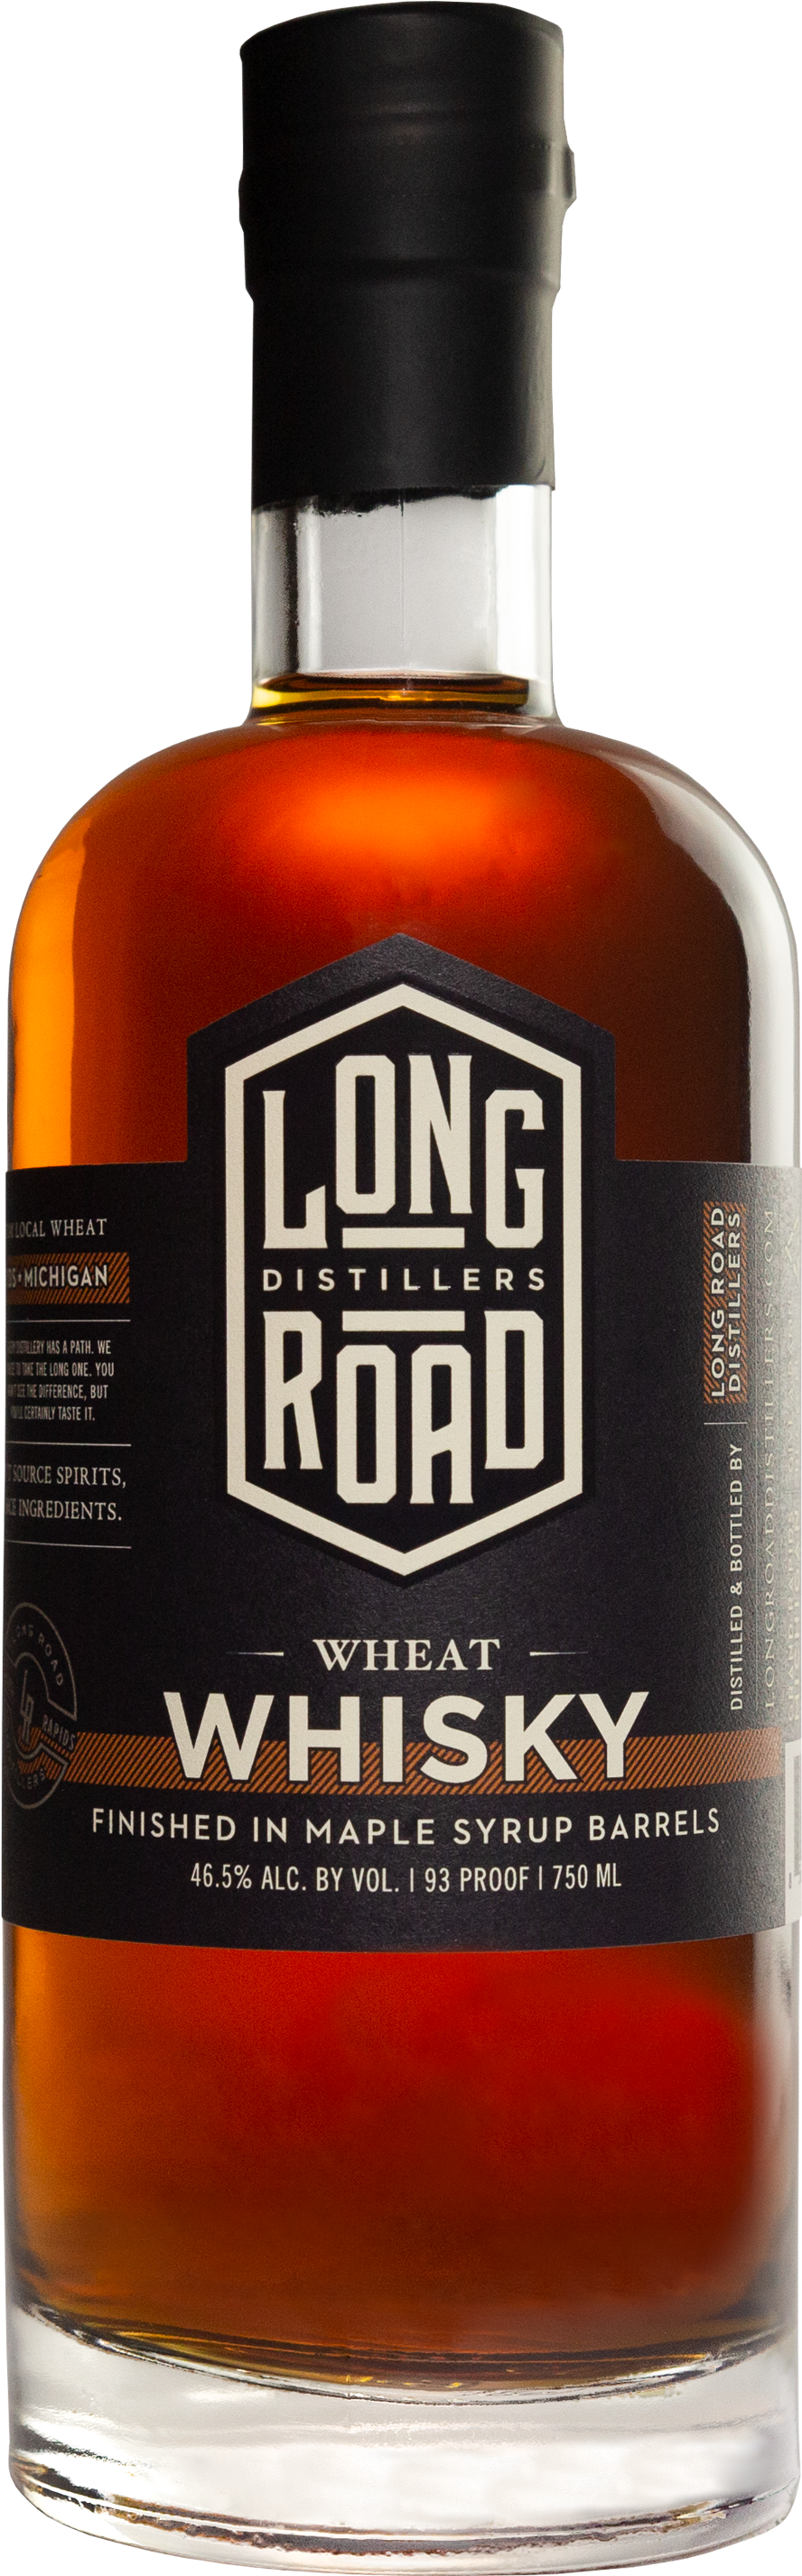 Long Road Distillers Wheat Whisky Bottle PNG image